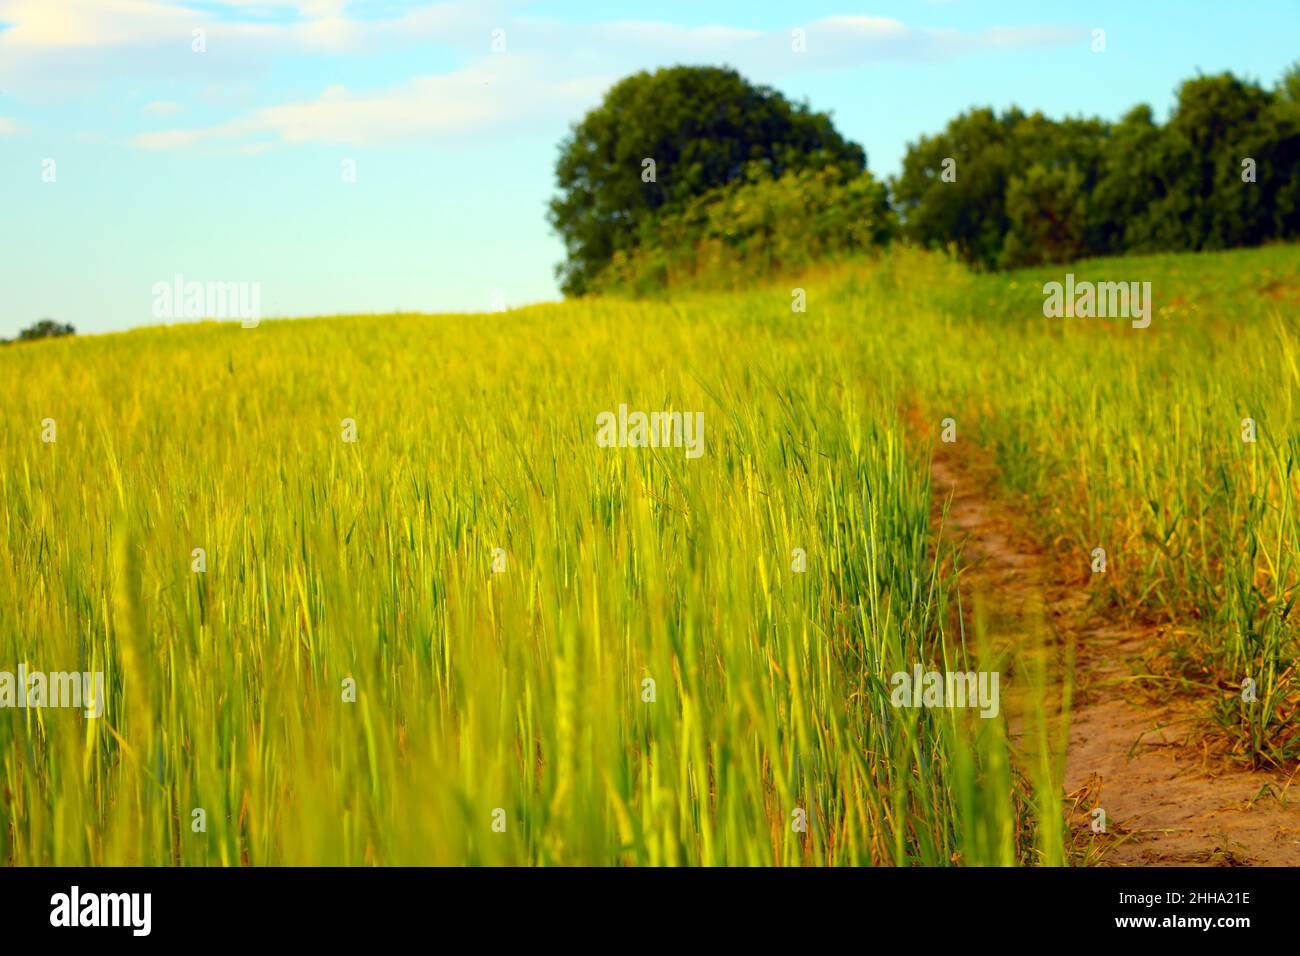 View of a young green wheat field in summer Stock Photo